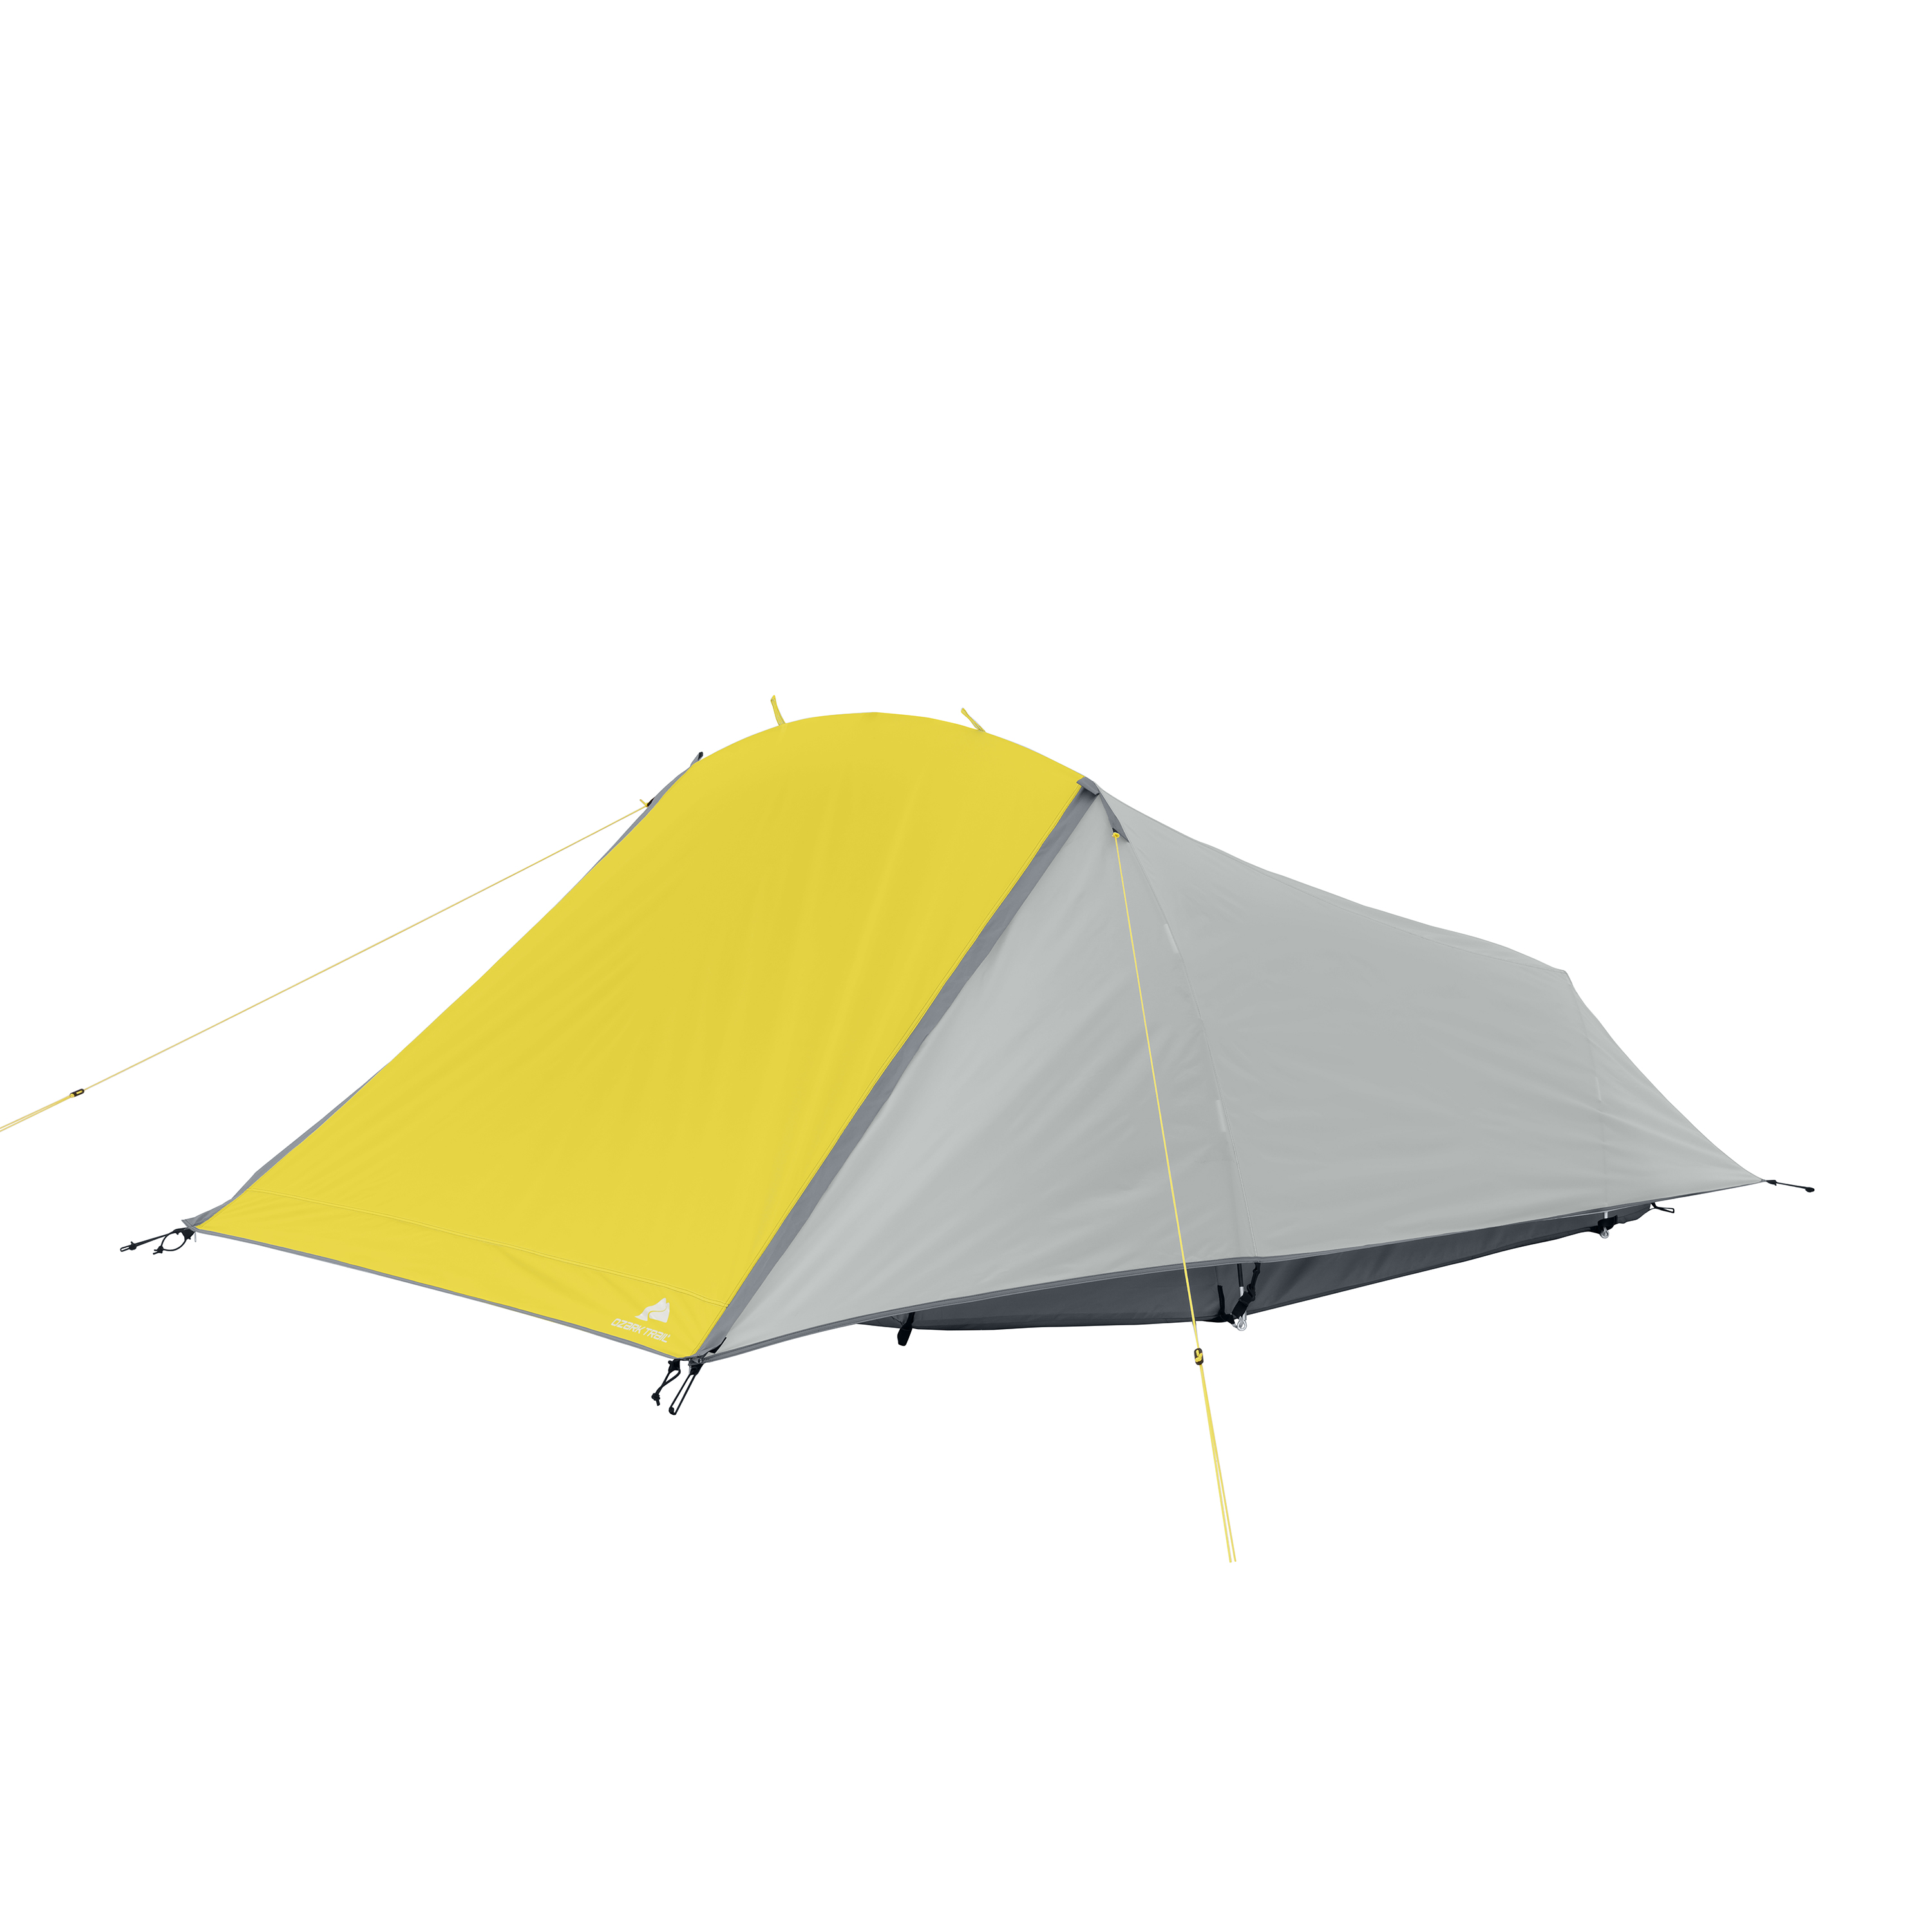 Ozark Trail 3-Person 16pc Camping Combo, Dome Tent with Rainfly, Trekking poles, Sleeping Bag, Sleeping Pad and Low-Back Chairs - image 2 of 12